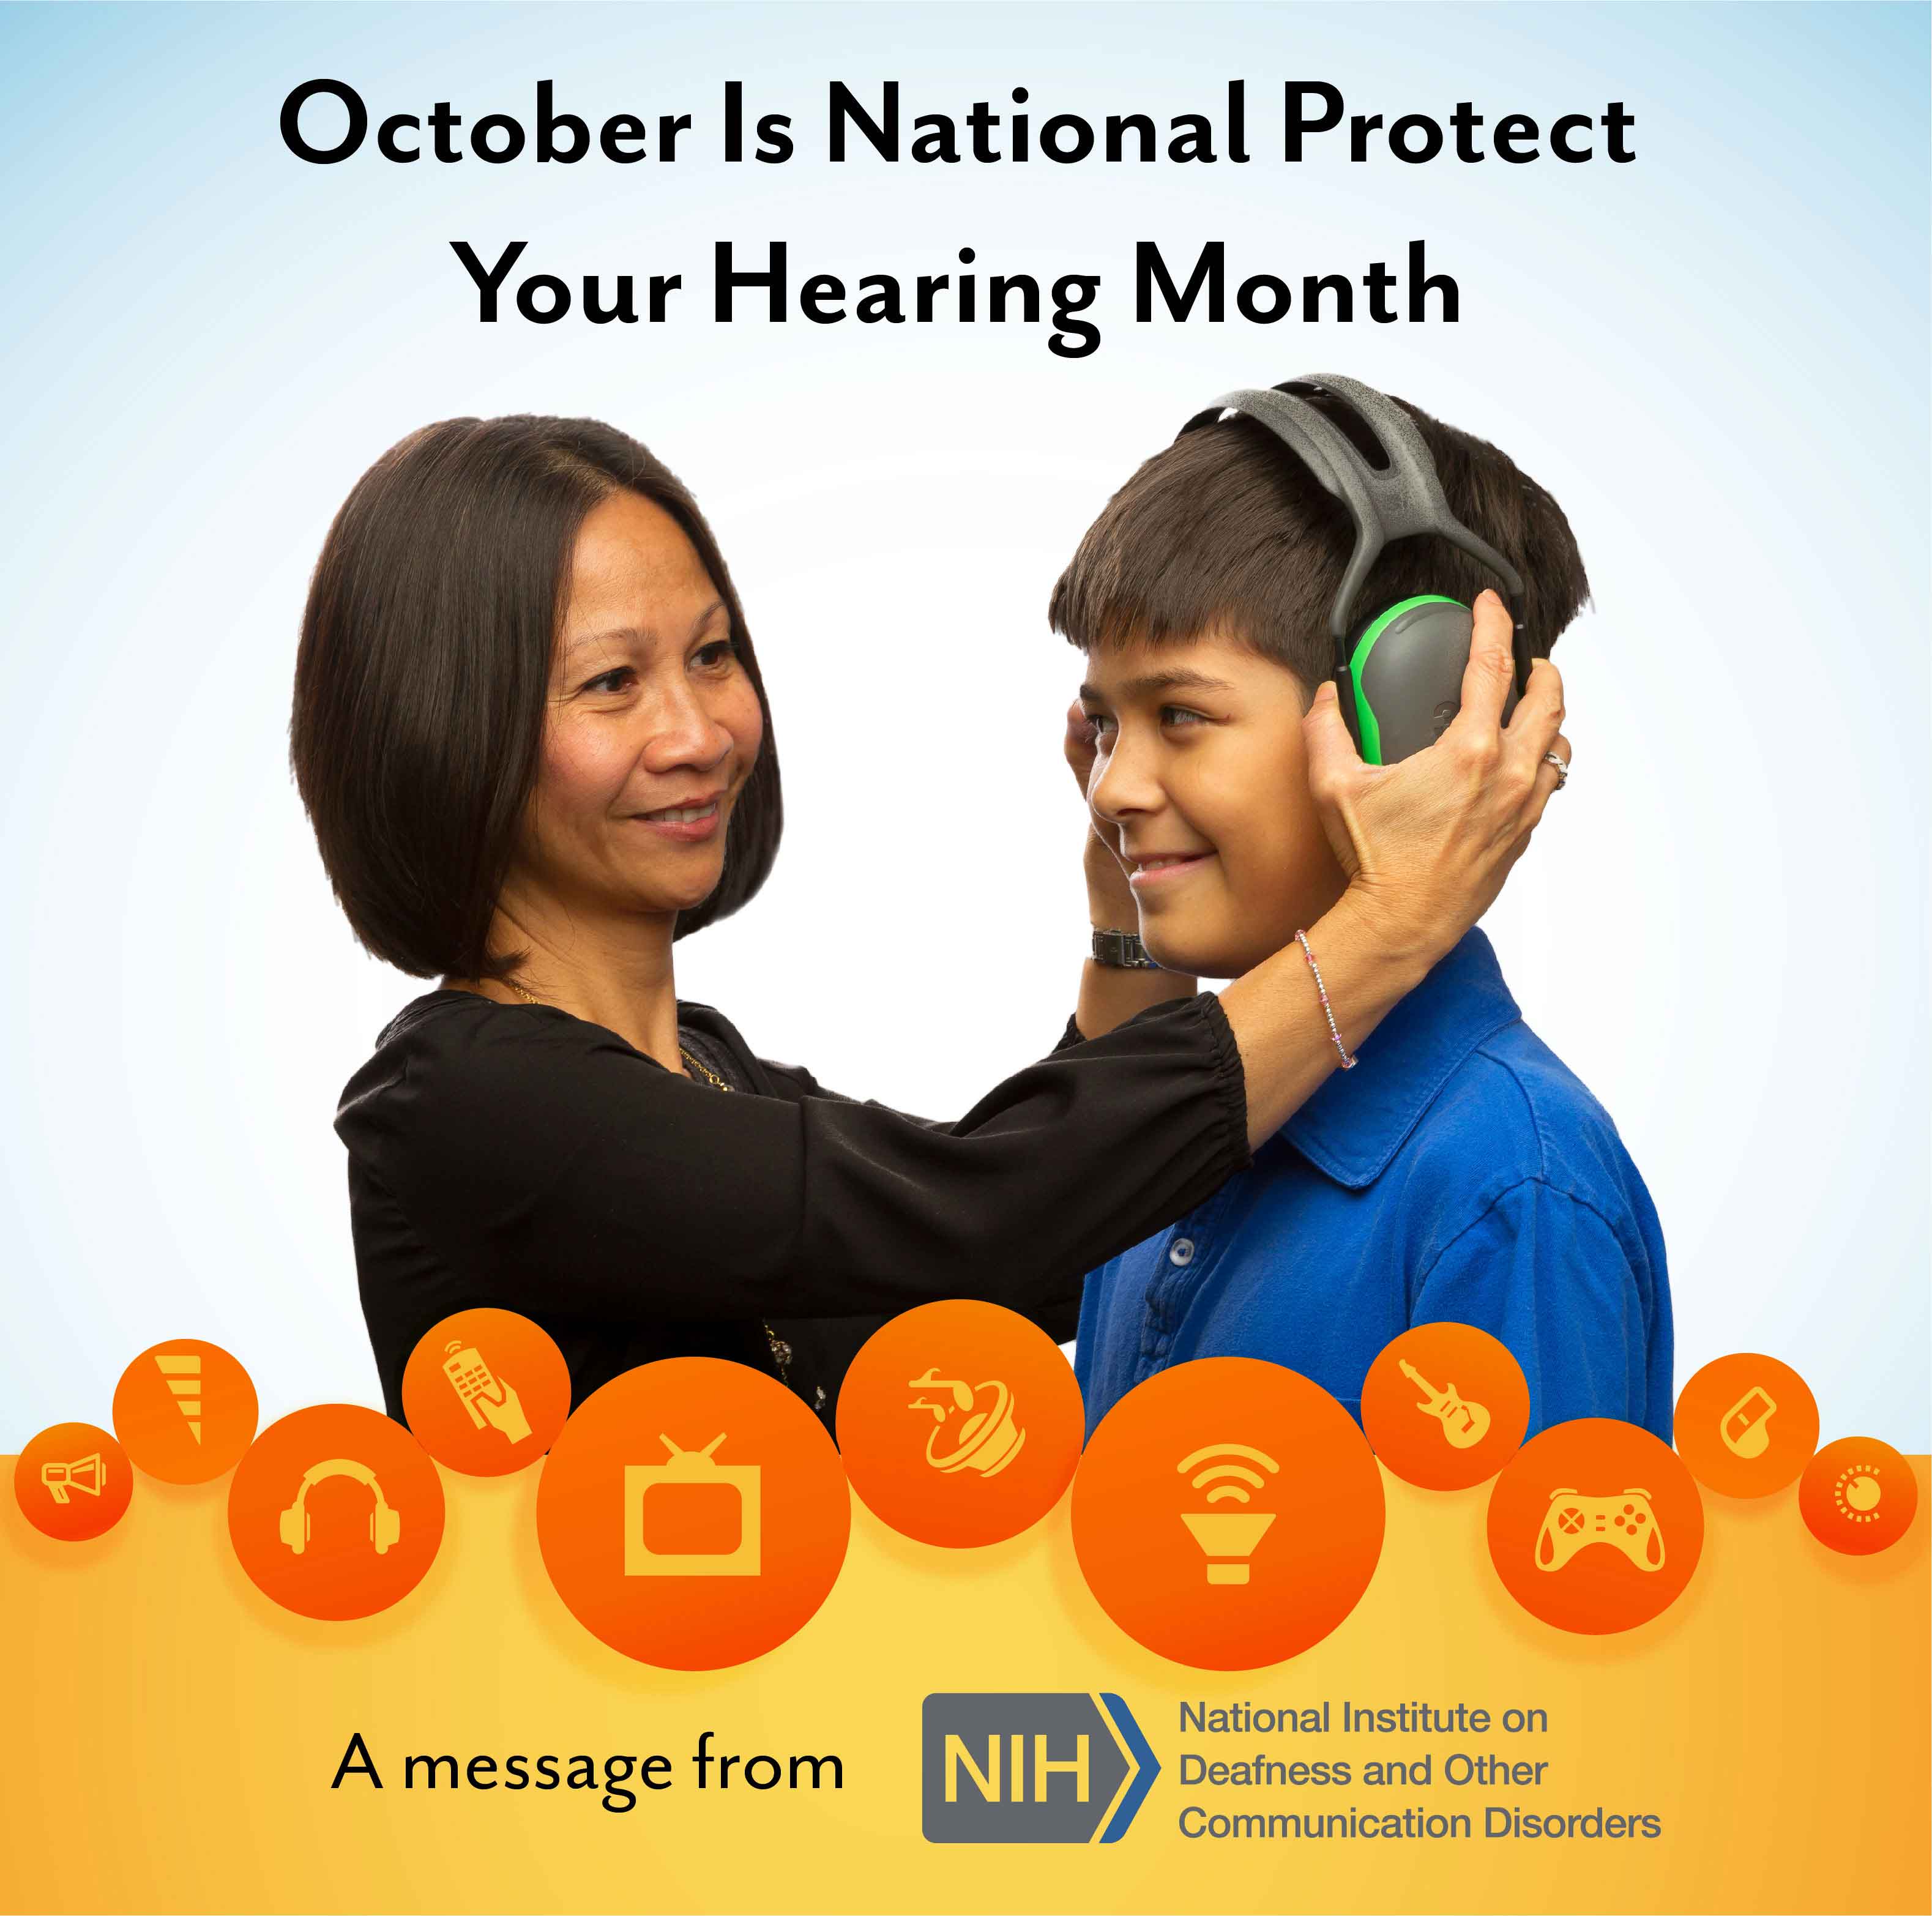 October is National Protect Your Hearing Month.